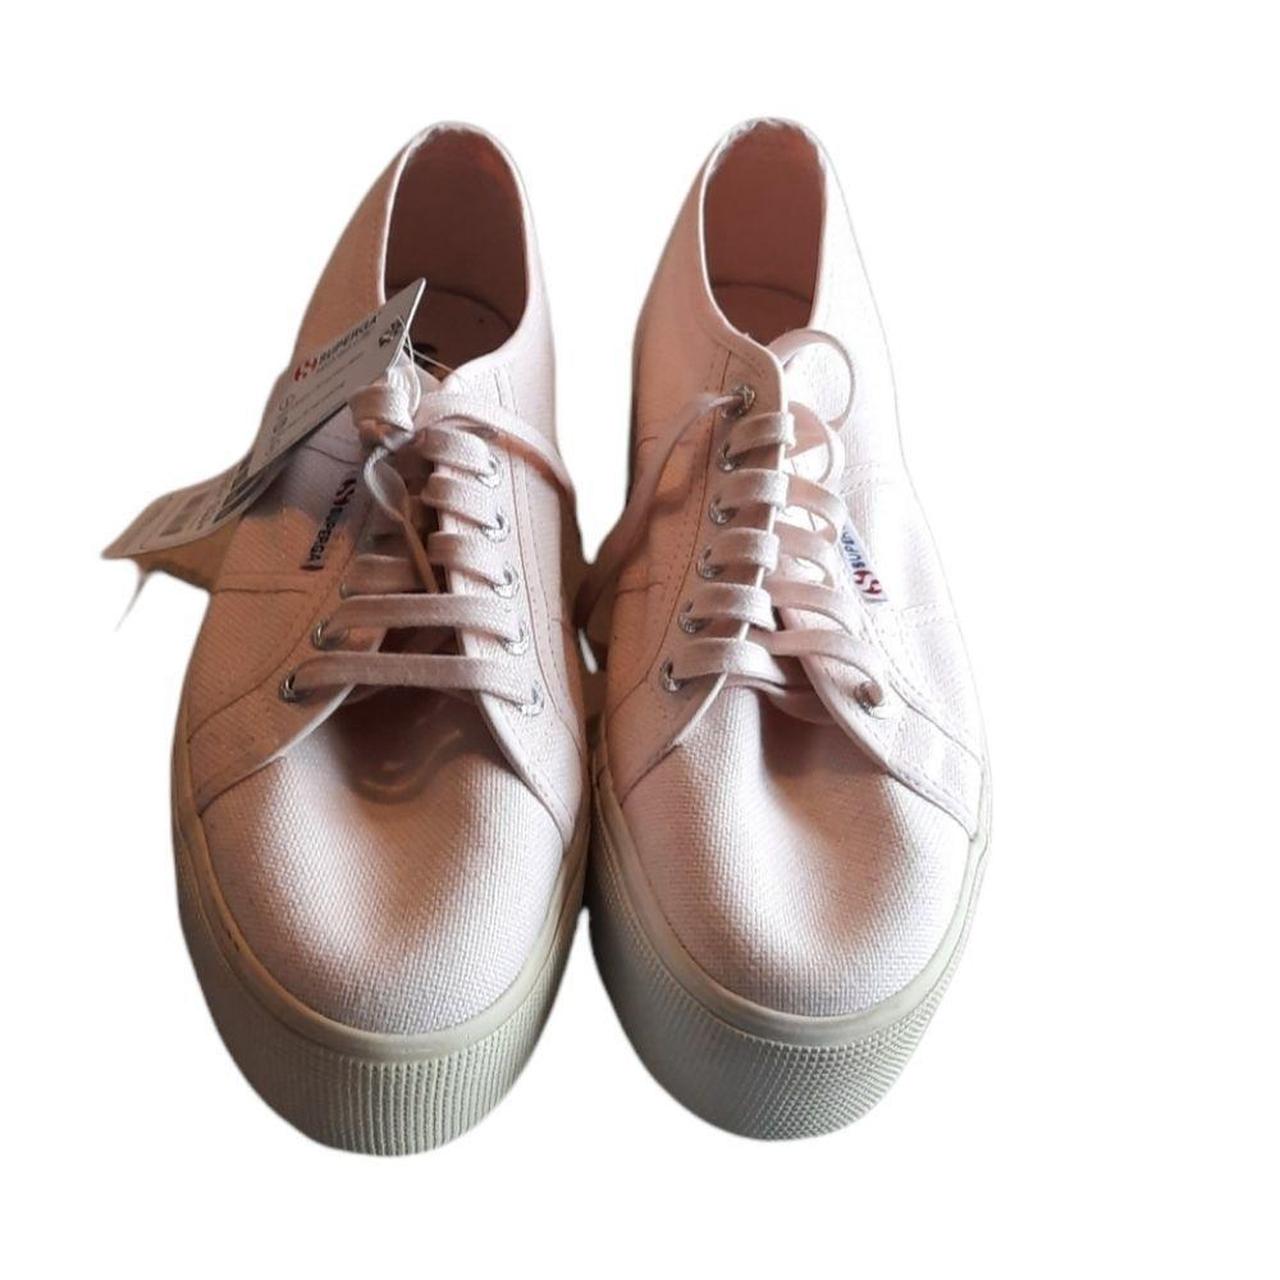 Product Image 1 - superga platform sneakers new with